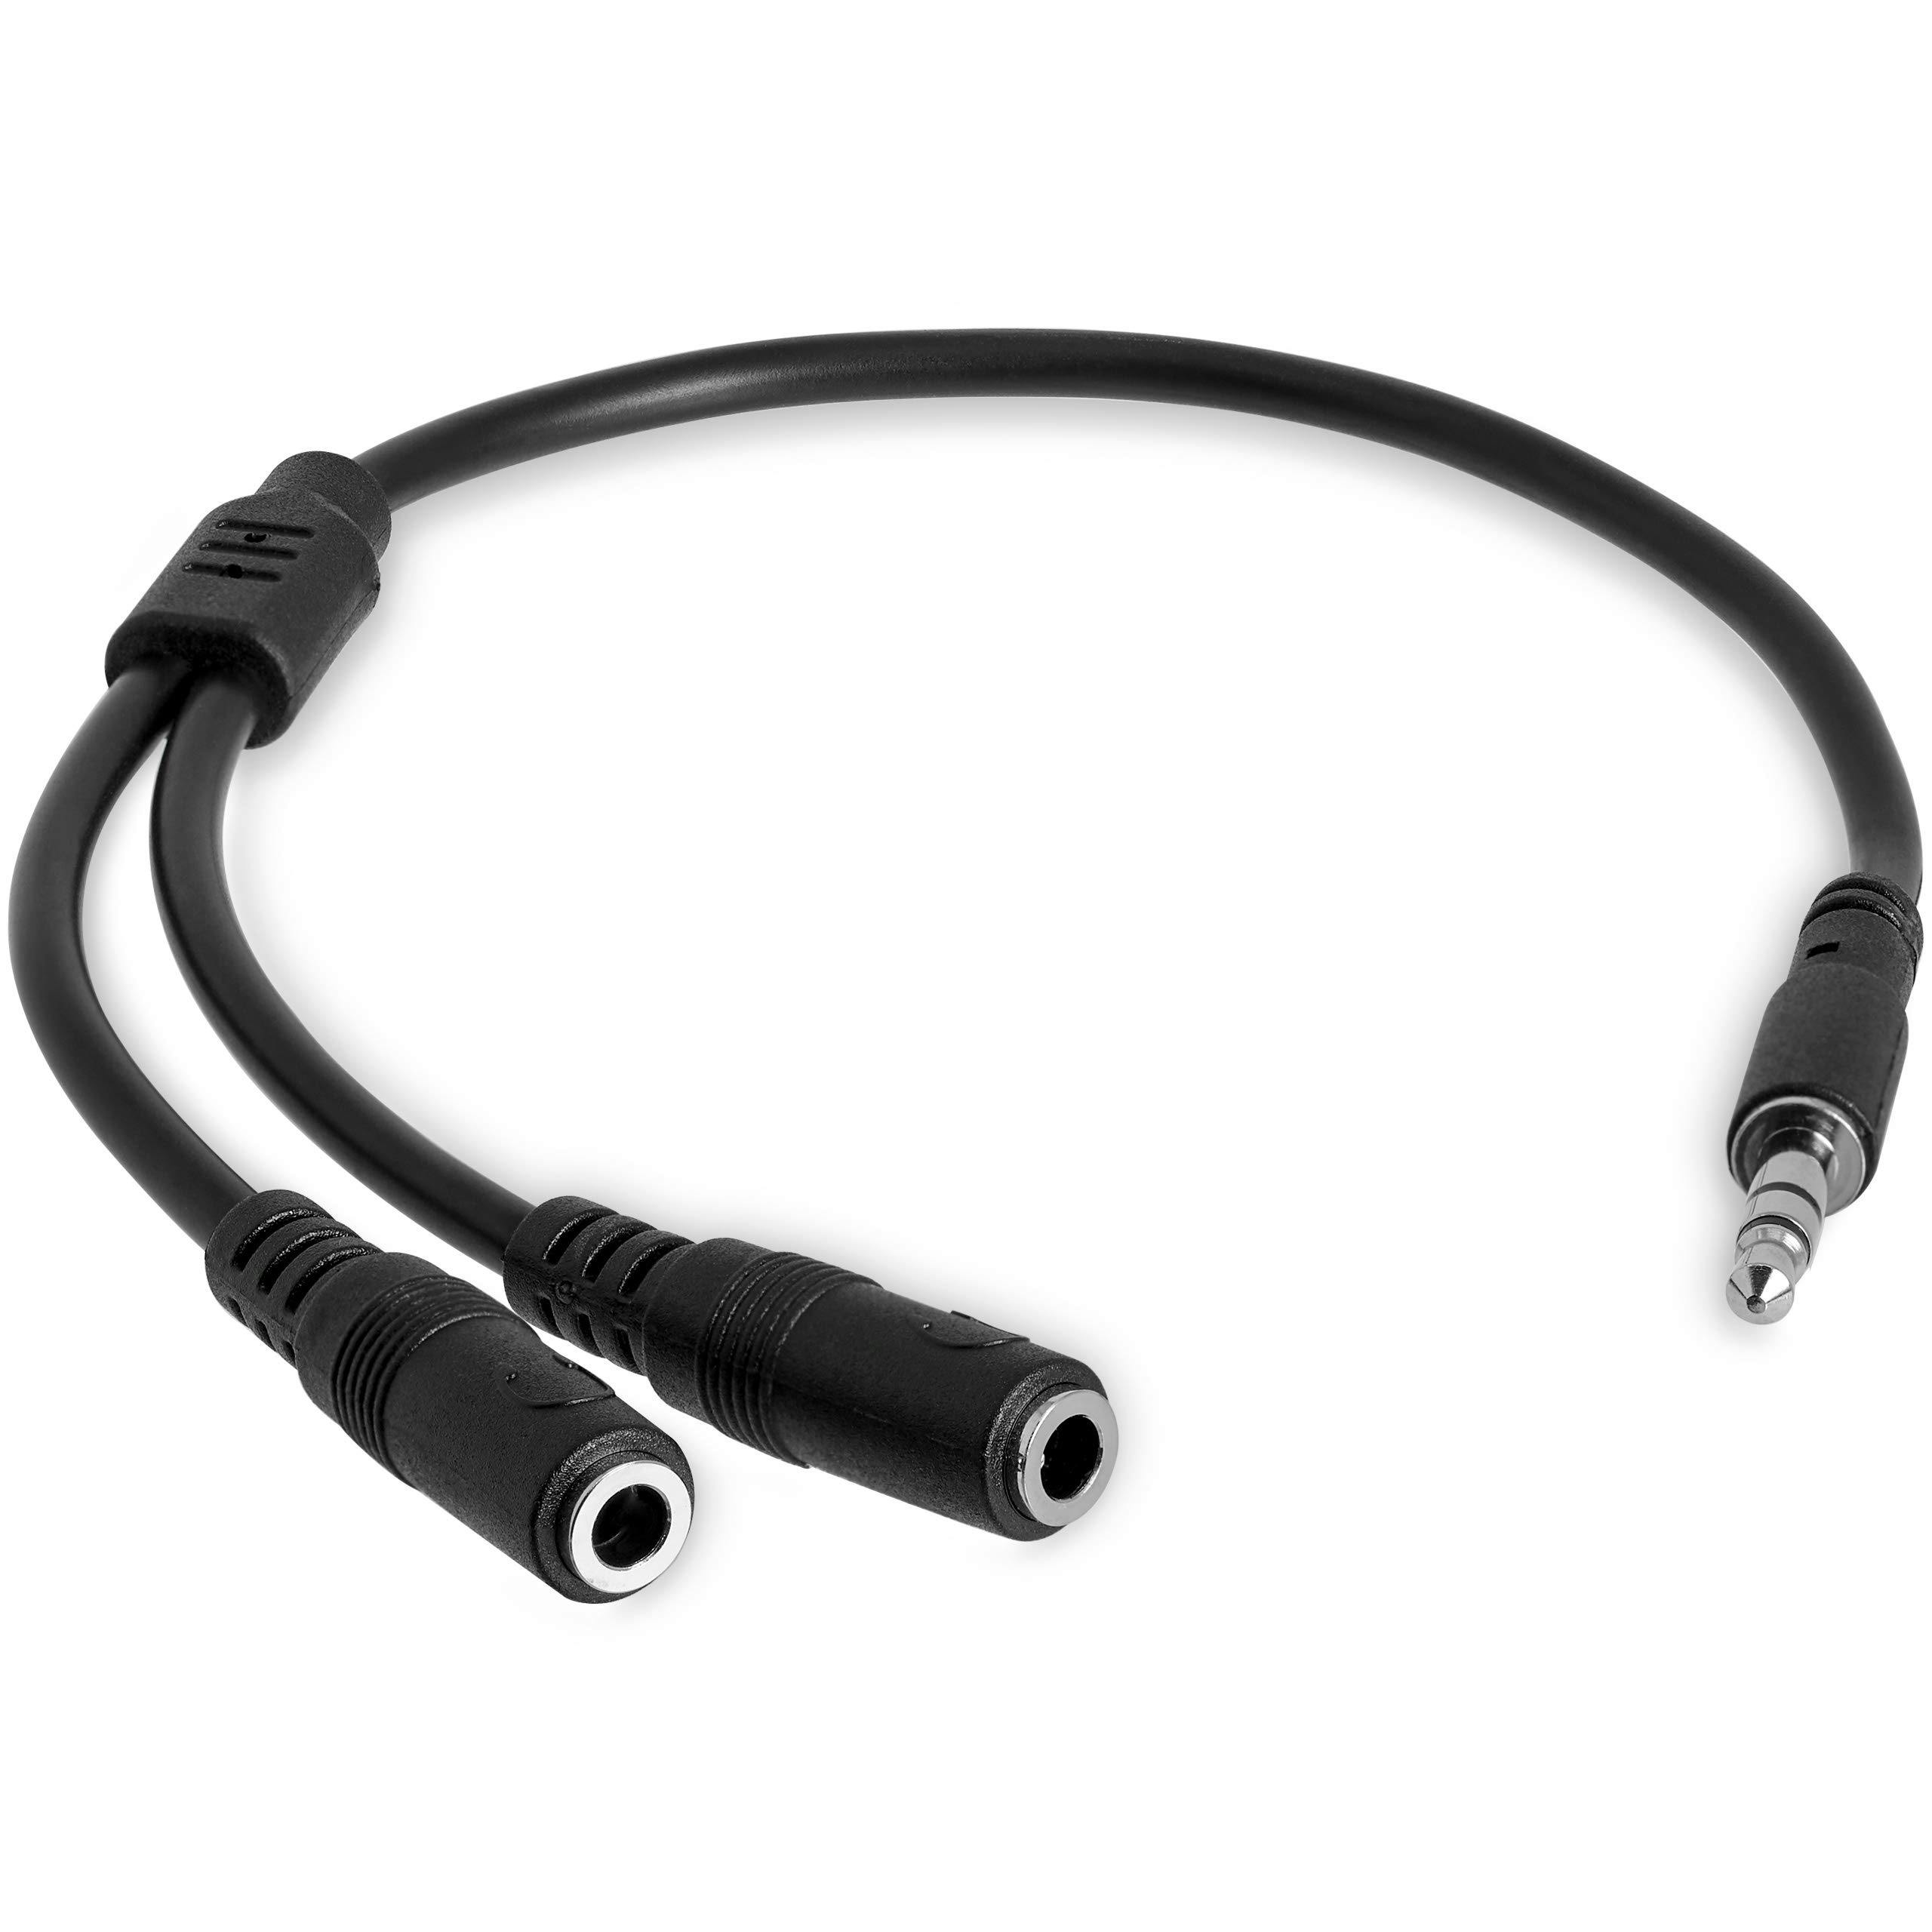 3.5mm Audio Extension Cable - Slim Audio Splitter Y Cable and Headphone Extender - Male to 2x Female AUX Cable 